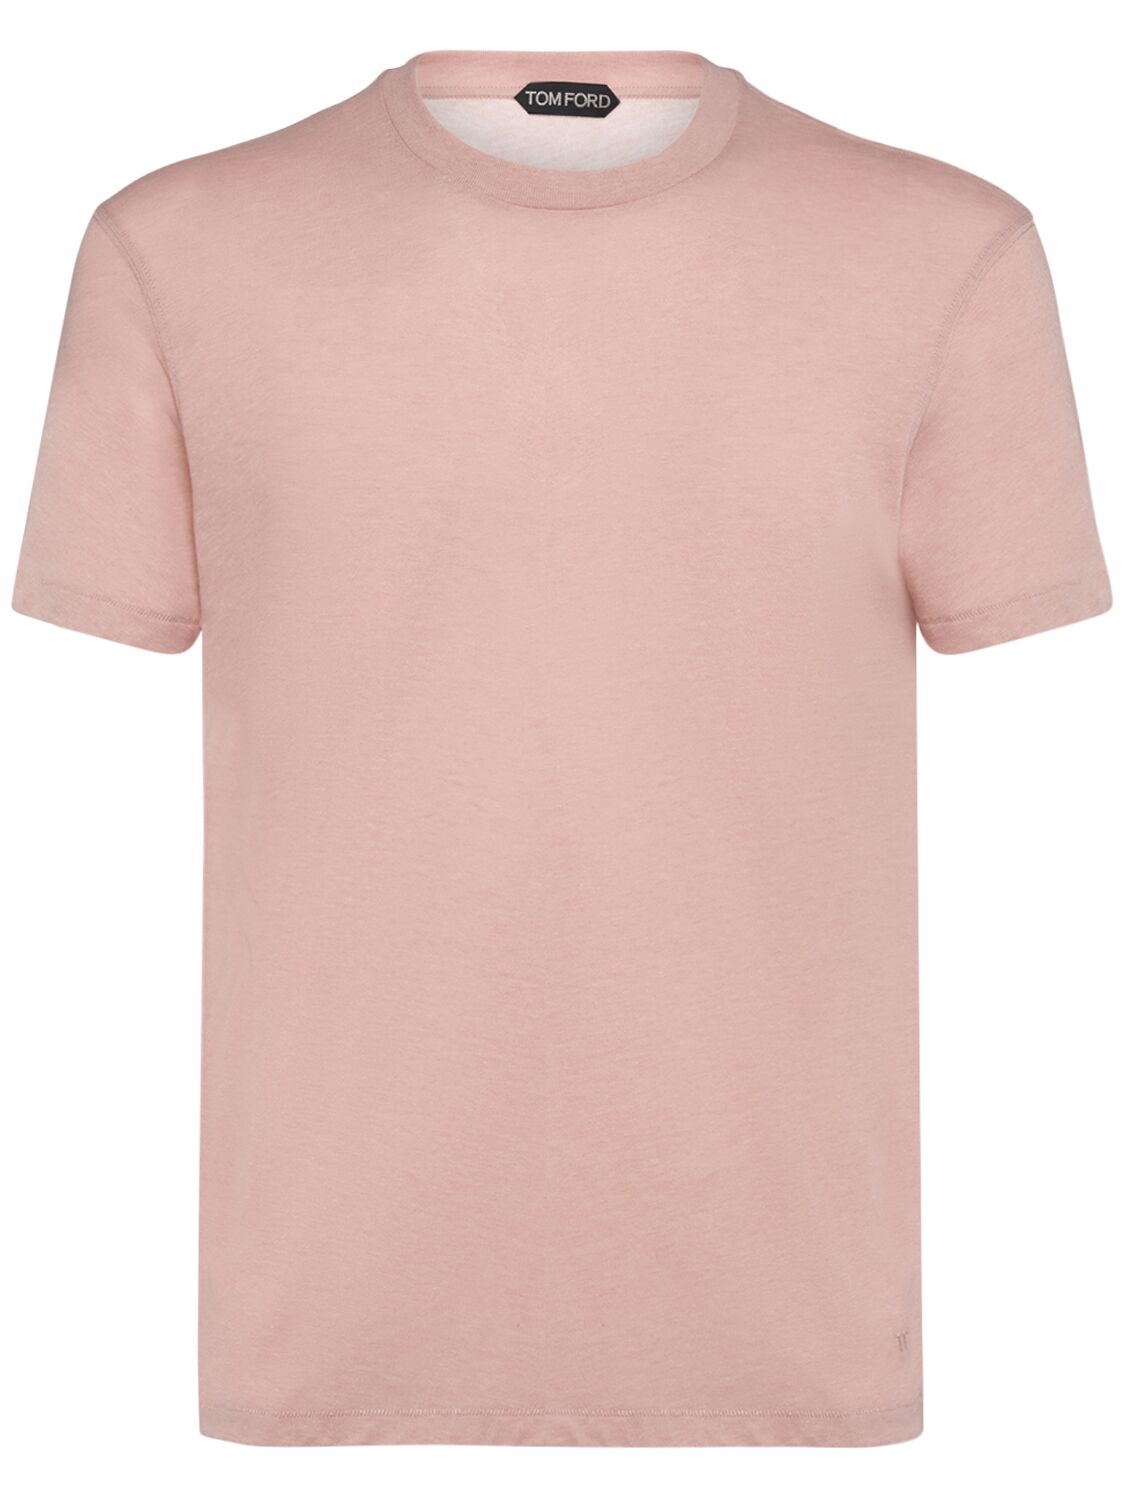 Tom Ford Cotton Blend Crewneck T-shirt In Dusty Pink